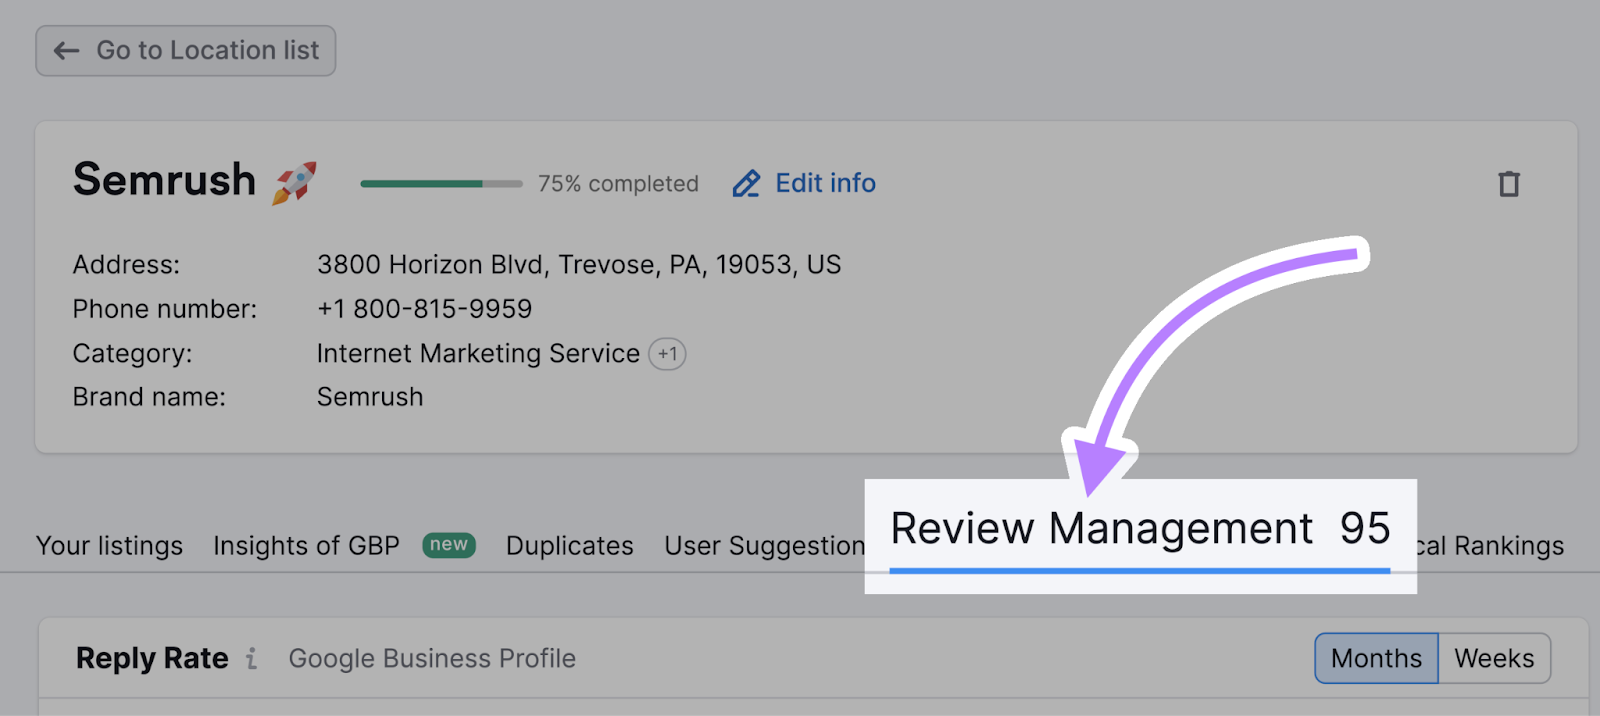 "Review Management" tab